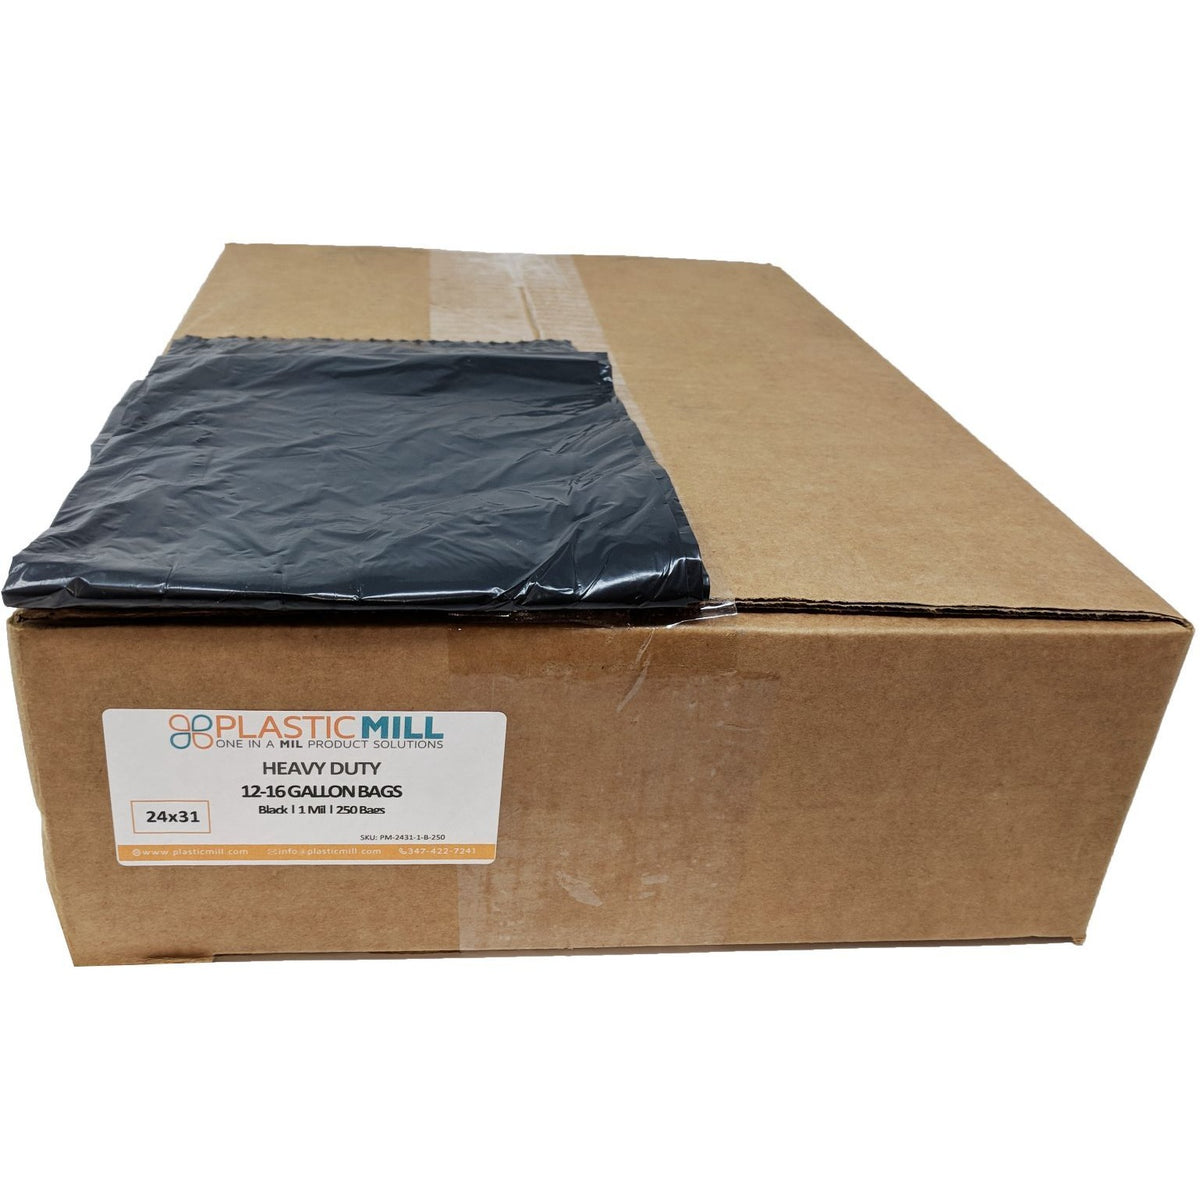 PlasticMill 12-16 Gallon, Black, 1 mil, 24x31, 250 Bags/Case, Garbage Bags / Trash Can